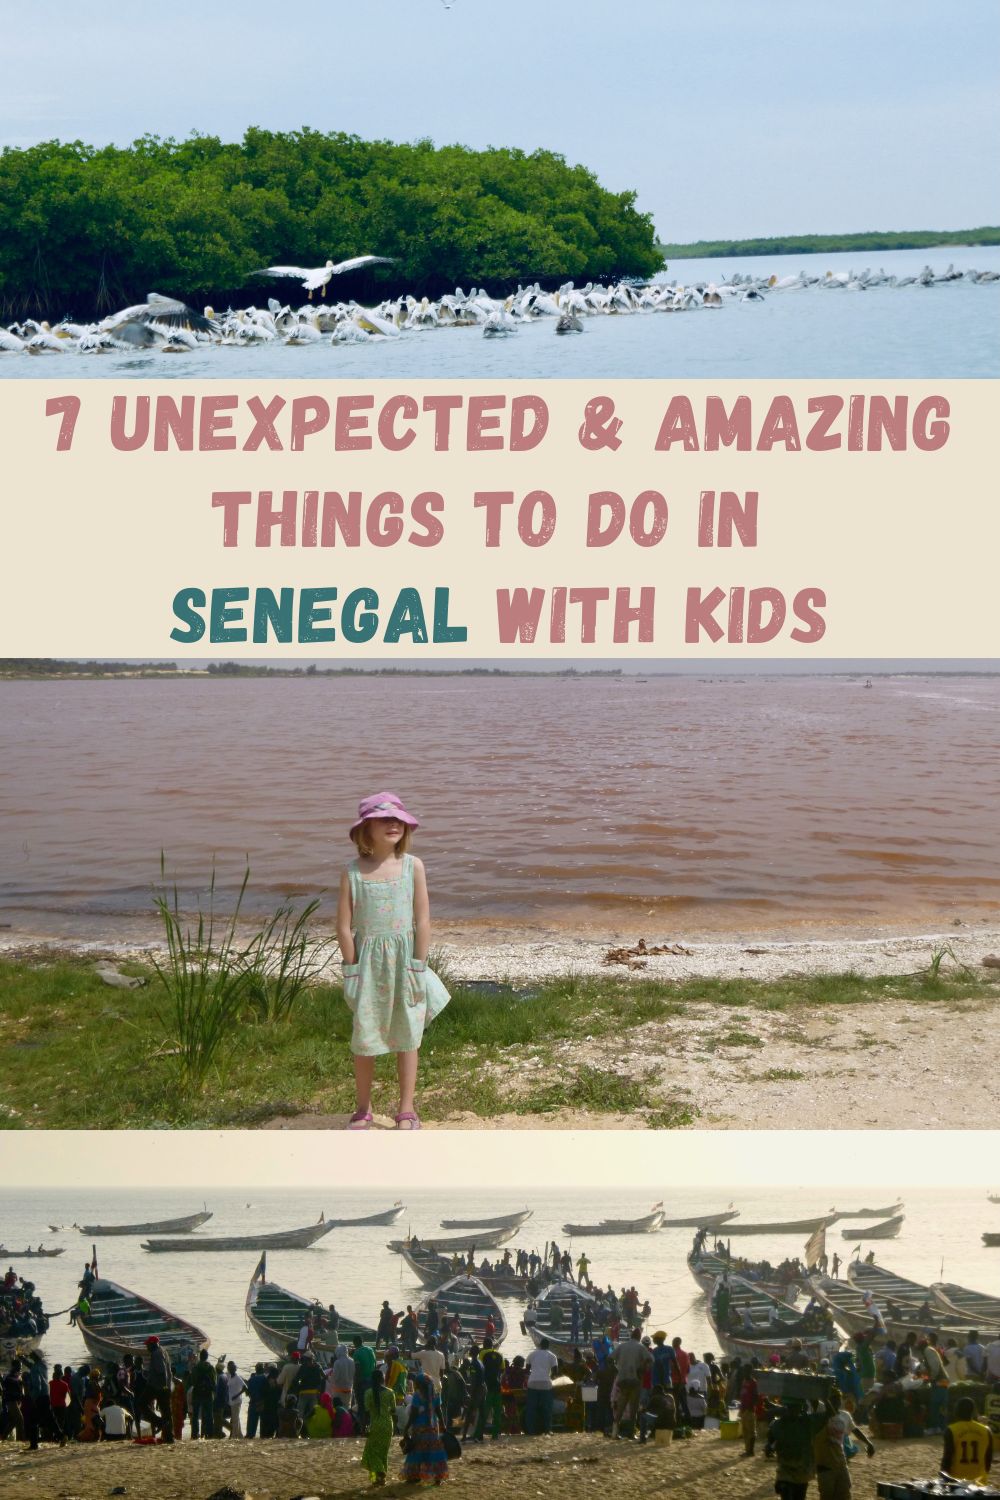 senegal, on the west coast of africa, has wildlife, history, beaches and a much shorter plane ride than other african tourist destinations. here are 7 things to do with kids plus all the basic information you need.  